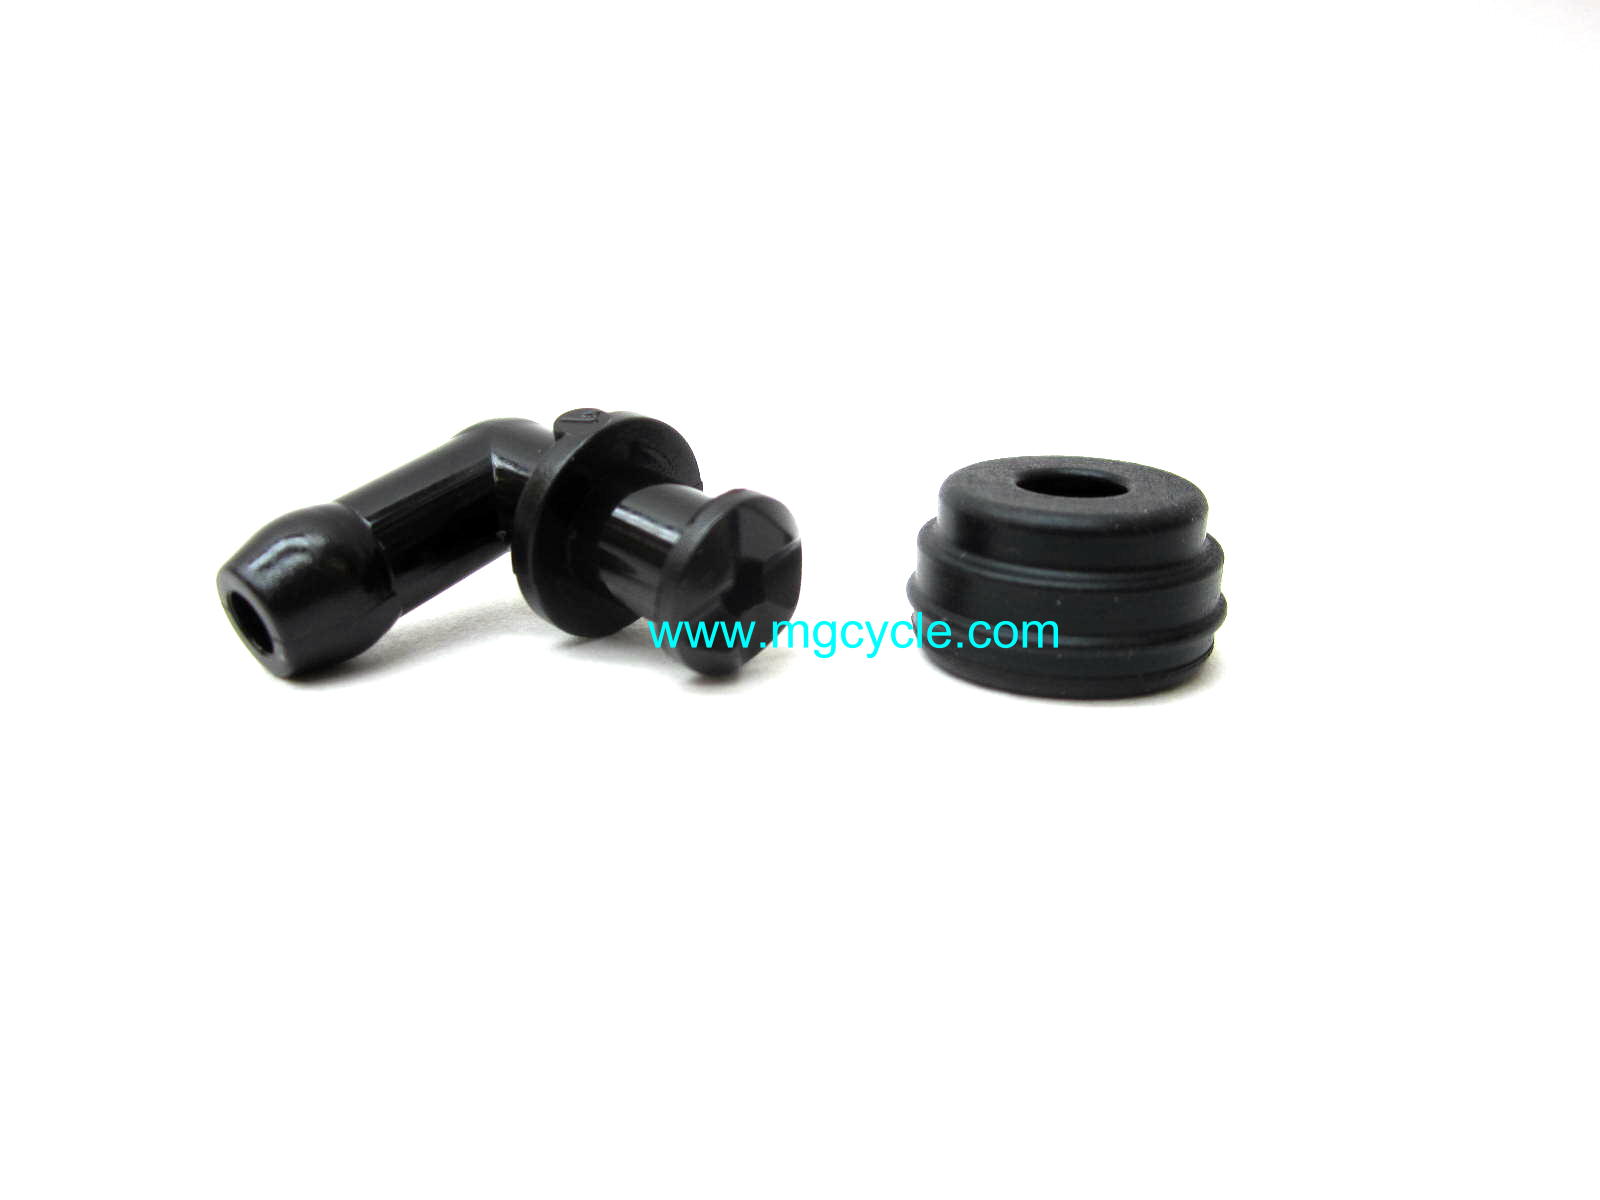 Brake fluid elbow and seal for remote reservoir master cylinders